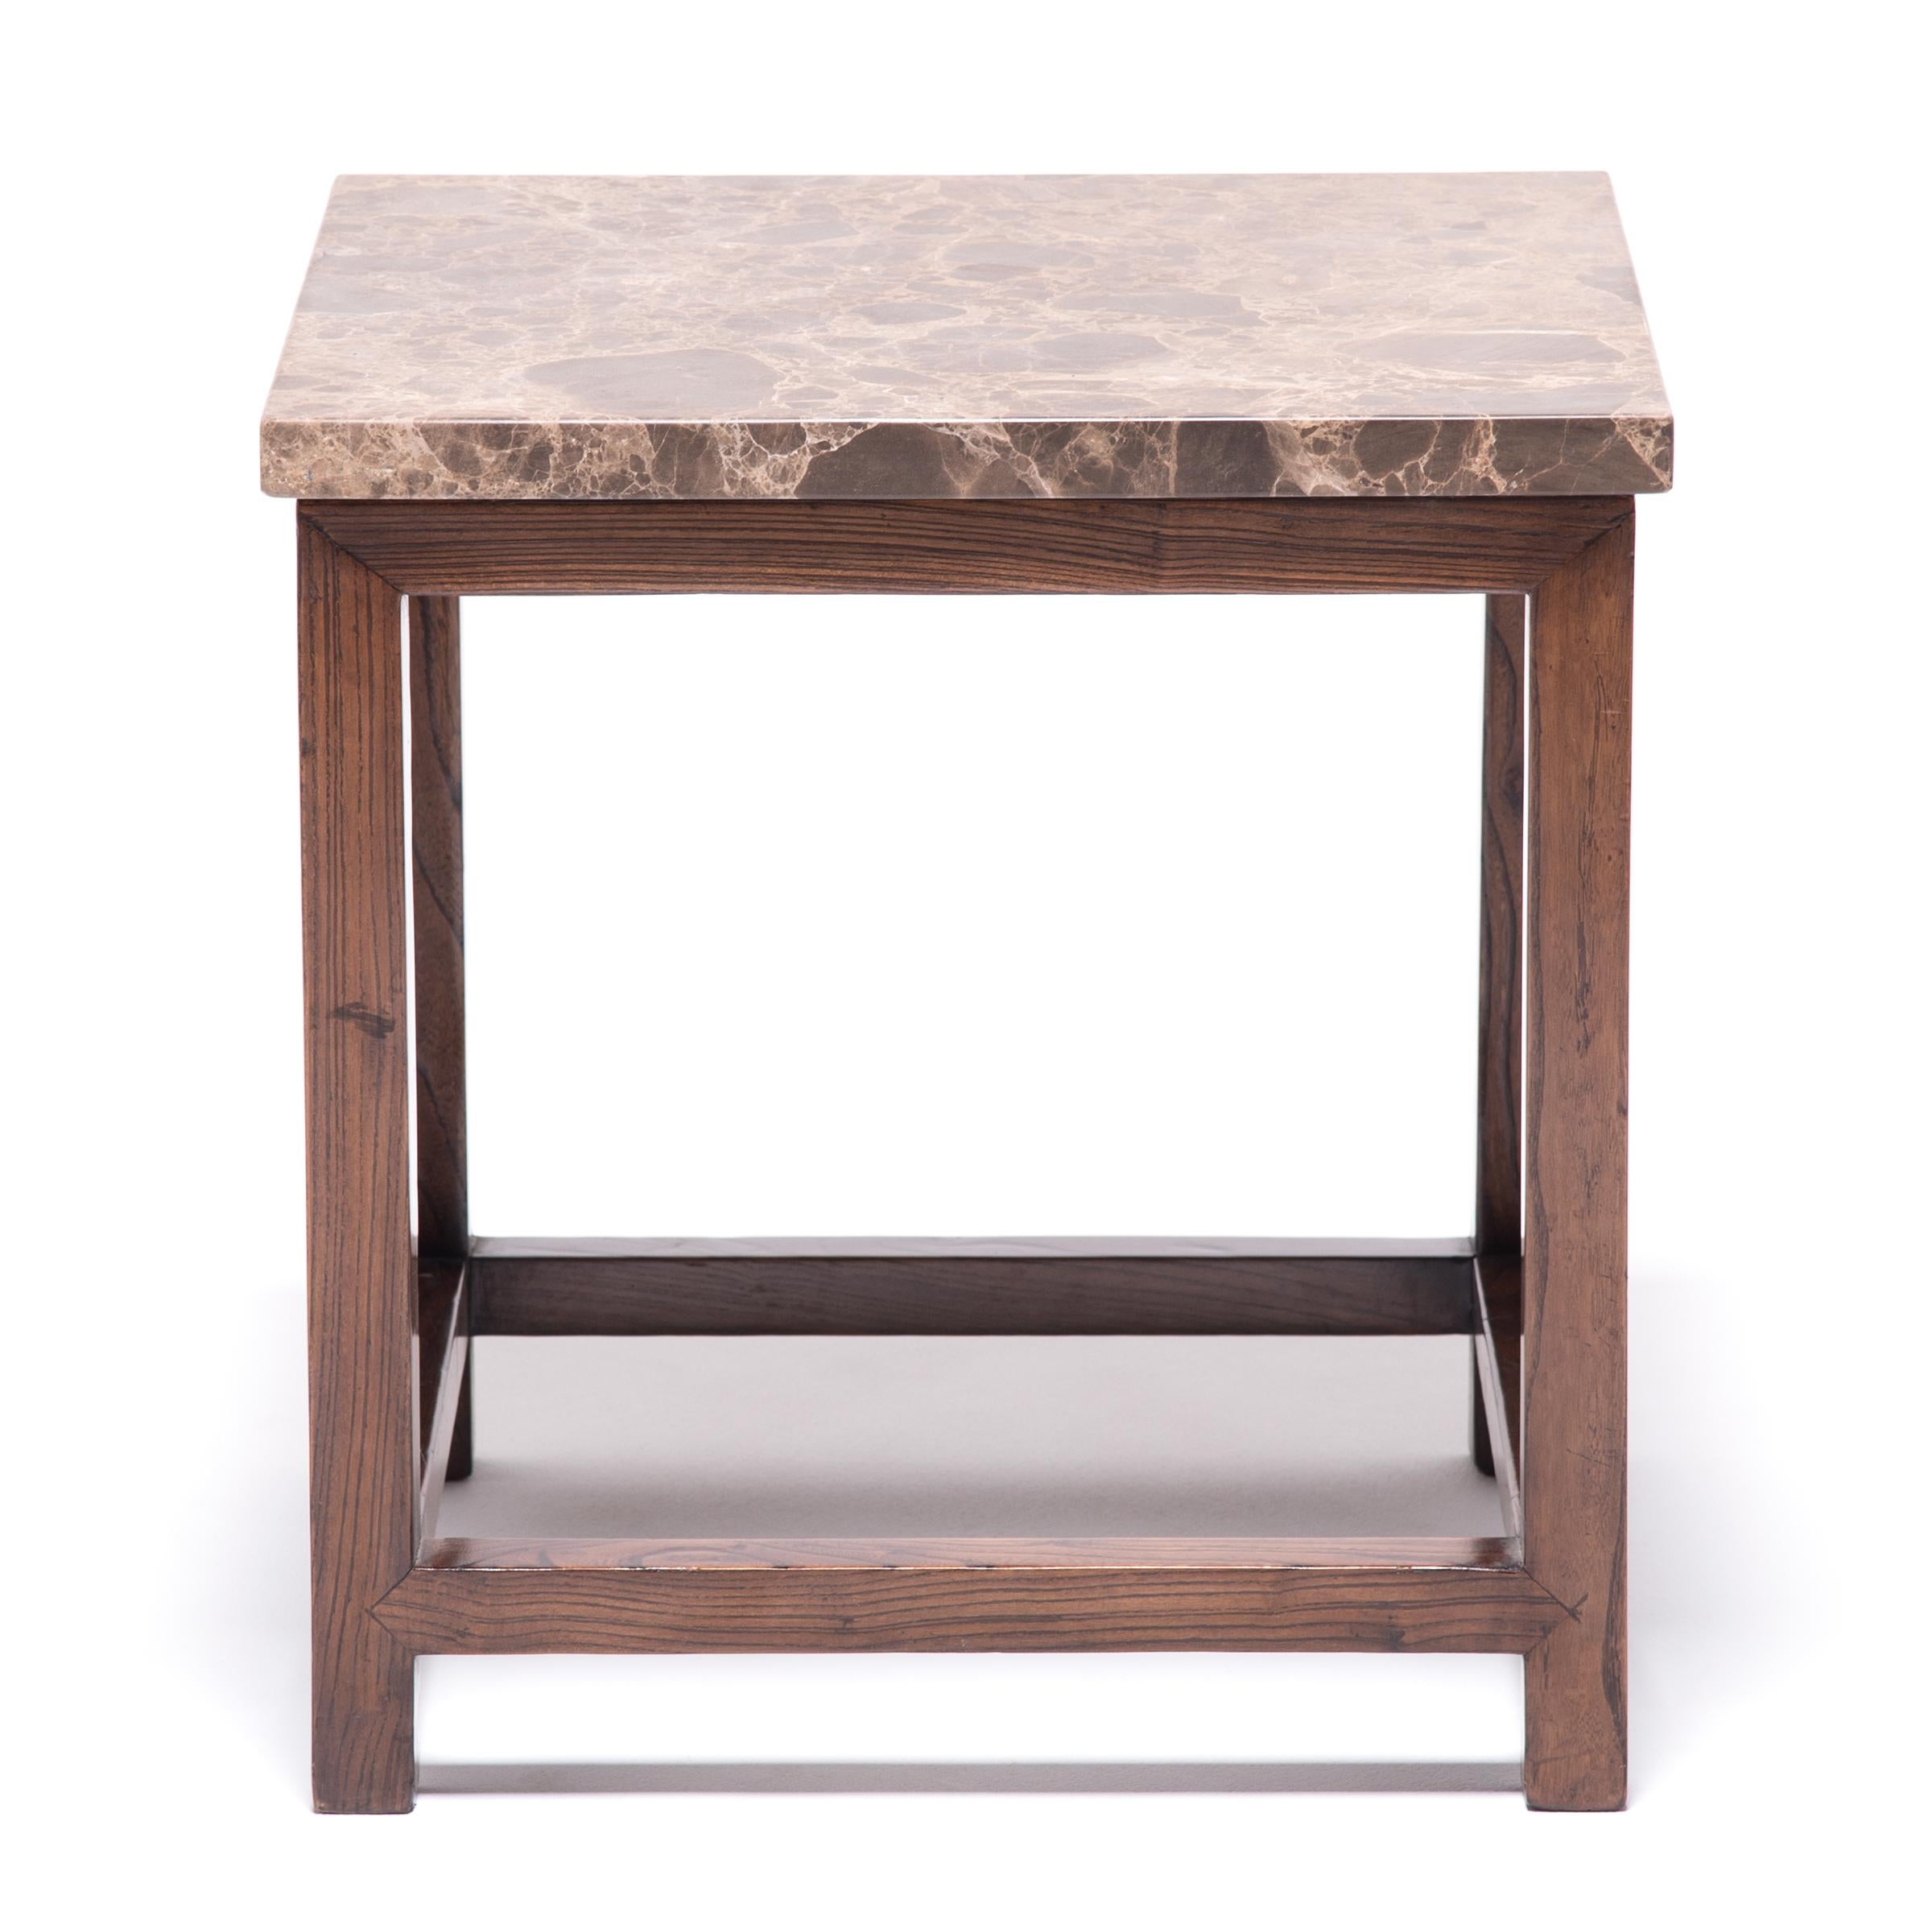 This deceptively simple feng deng (square stool) is a masterpiece of the harmonious design celebrated in traditional Chinese furniture. Clear in construction and pure in materials, the stool is a great example of corner-leg furniture, a box-like